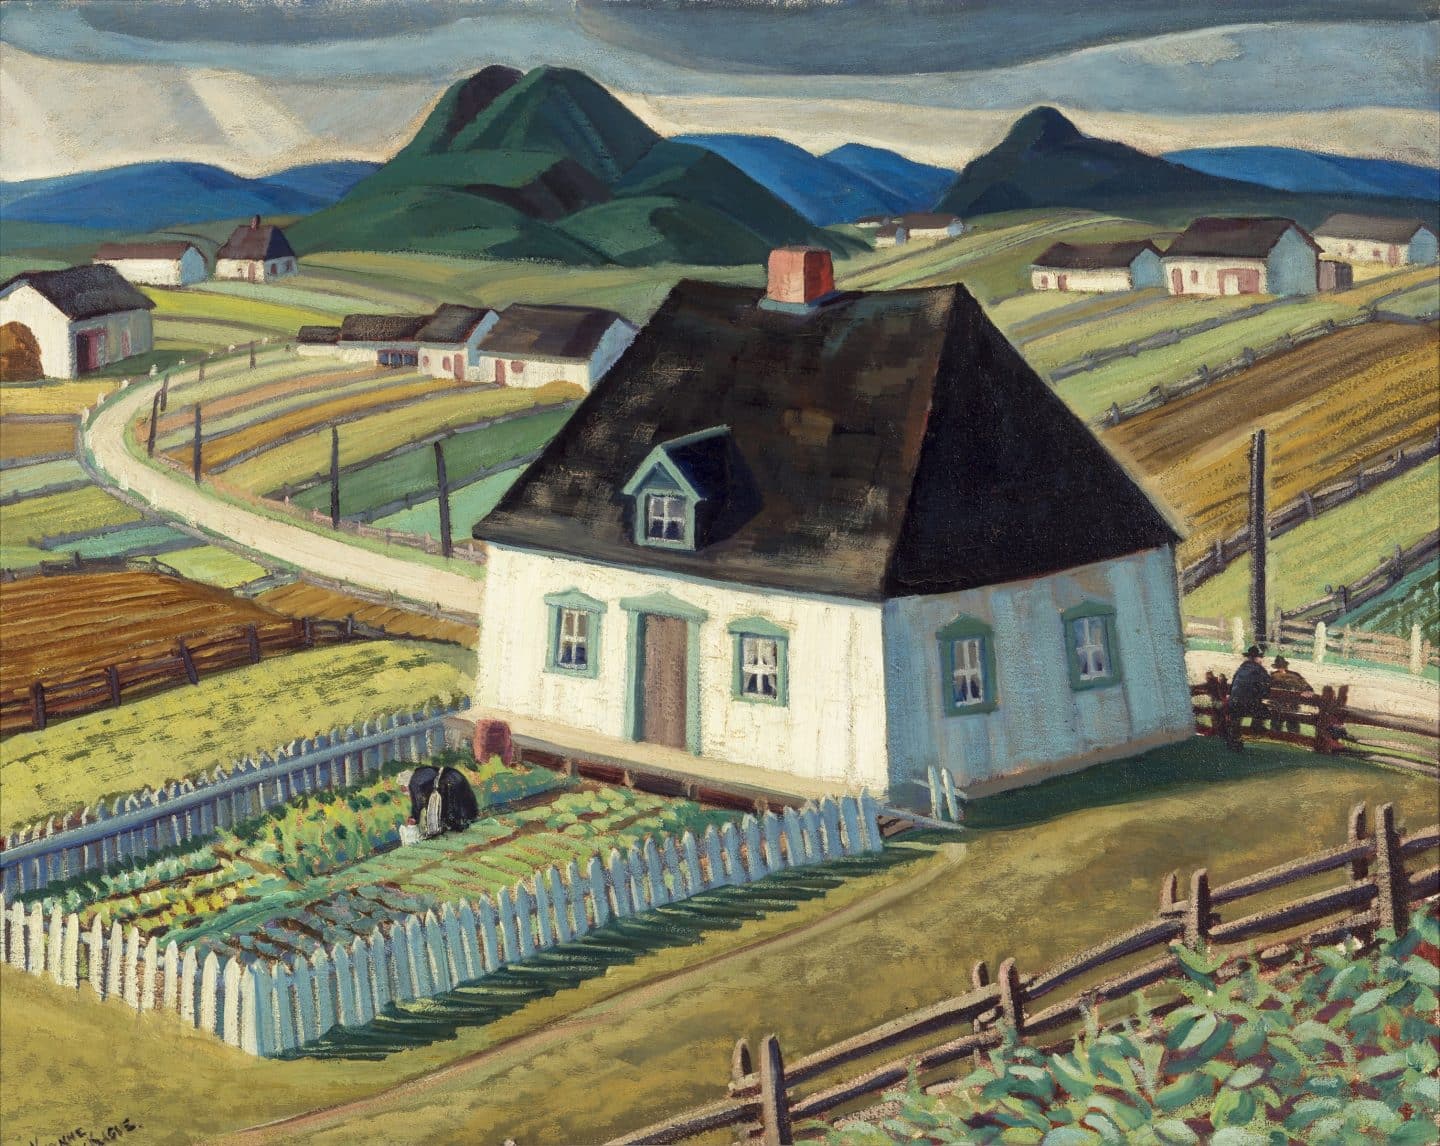 Yvonne McKague Housser, South Shore, Quebec, 1933, oil on canvas. Hart House Art Collection, University of Toronto. Gift of Graduating Year of 1934. Photo: Toni Hafkenscheid